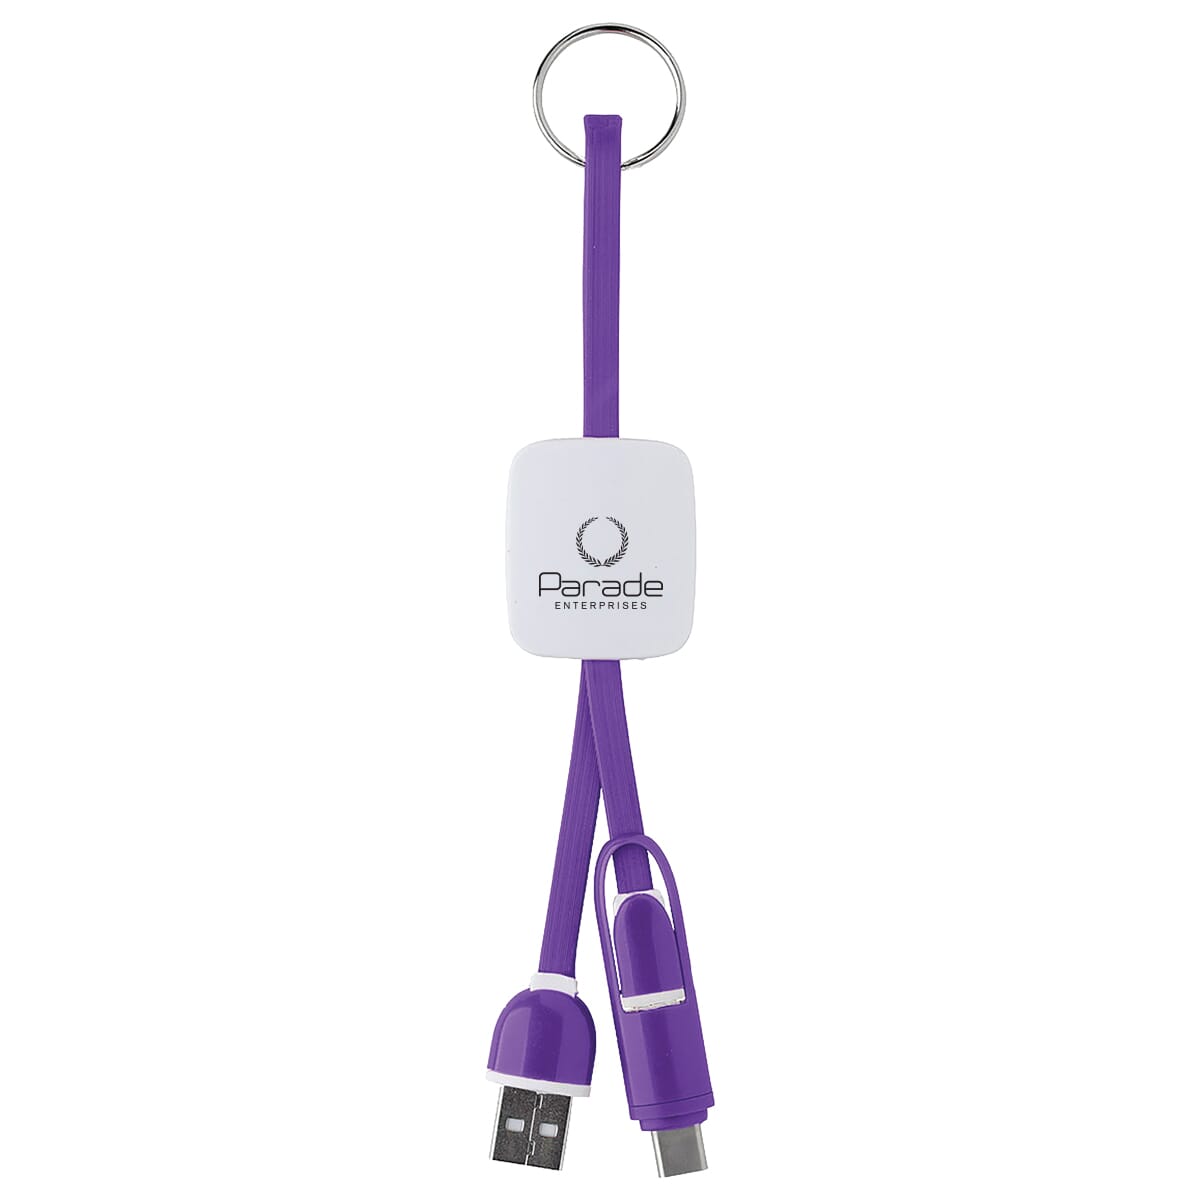 Slide charging cables on key ring